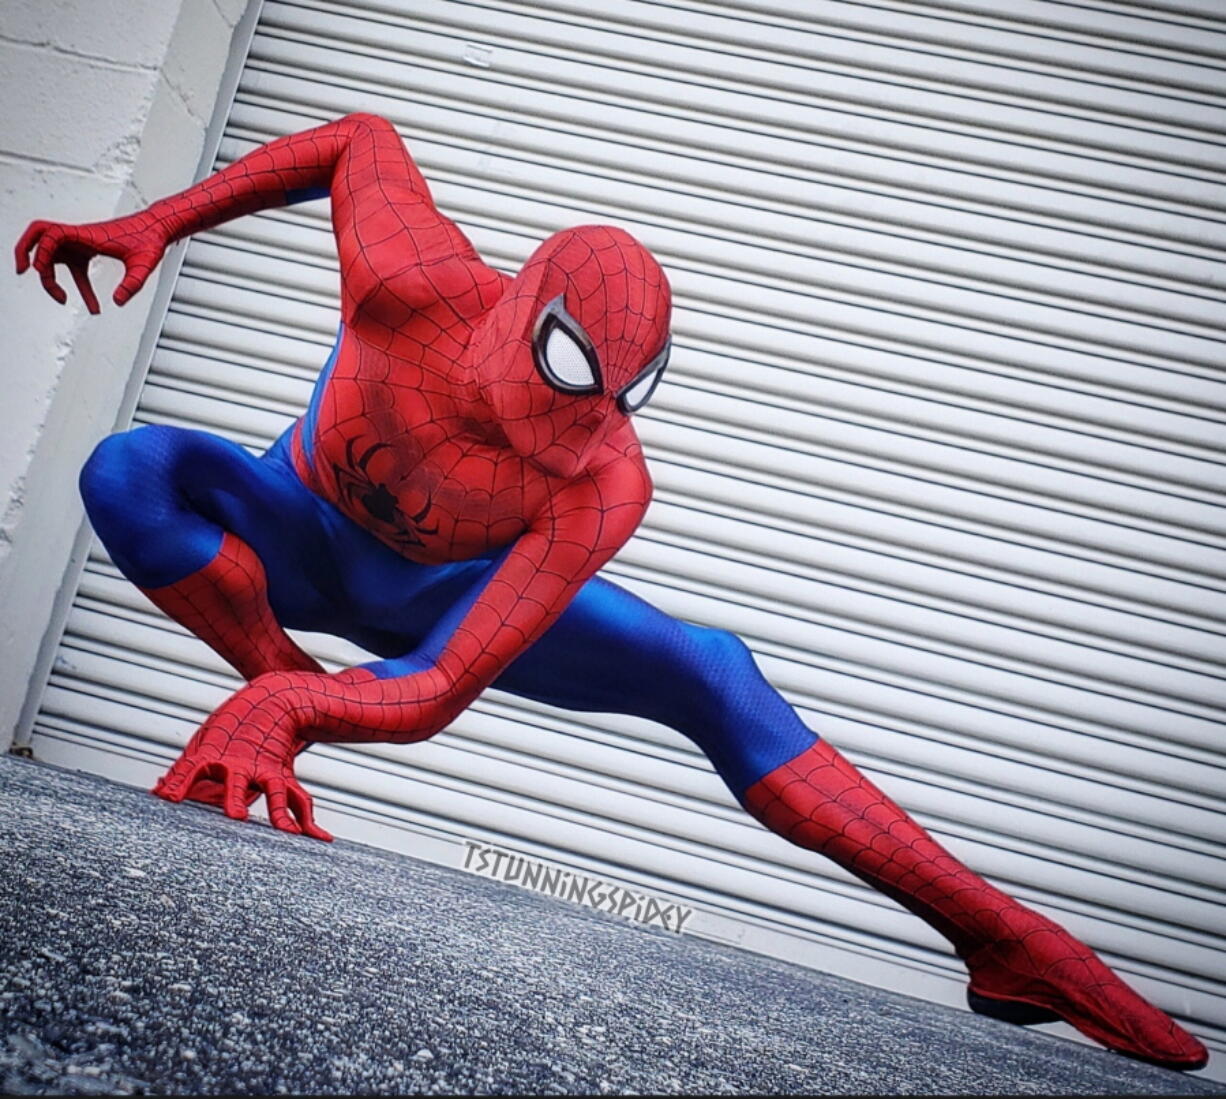 In these undated photos provided by Tyler Scott Hoover, a professional Spider-Man cosplayer and model, Hoover is pictured in the classic costume of the Marvel comic superhero. In August 2022, as the iconic character marks 60 years in the vast, imaginative world of comic books, movies and merchandise, fans like Hoover reflect on Spider-Man's appeal across race, gender and nationality.